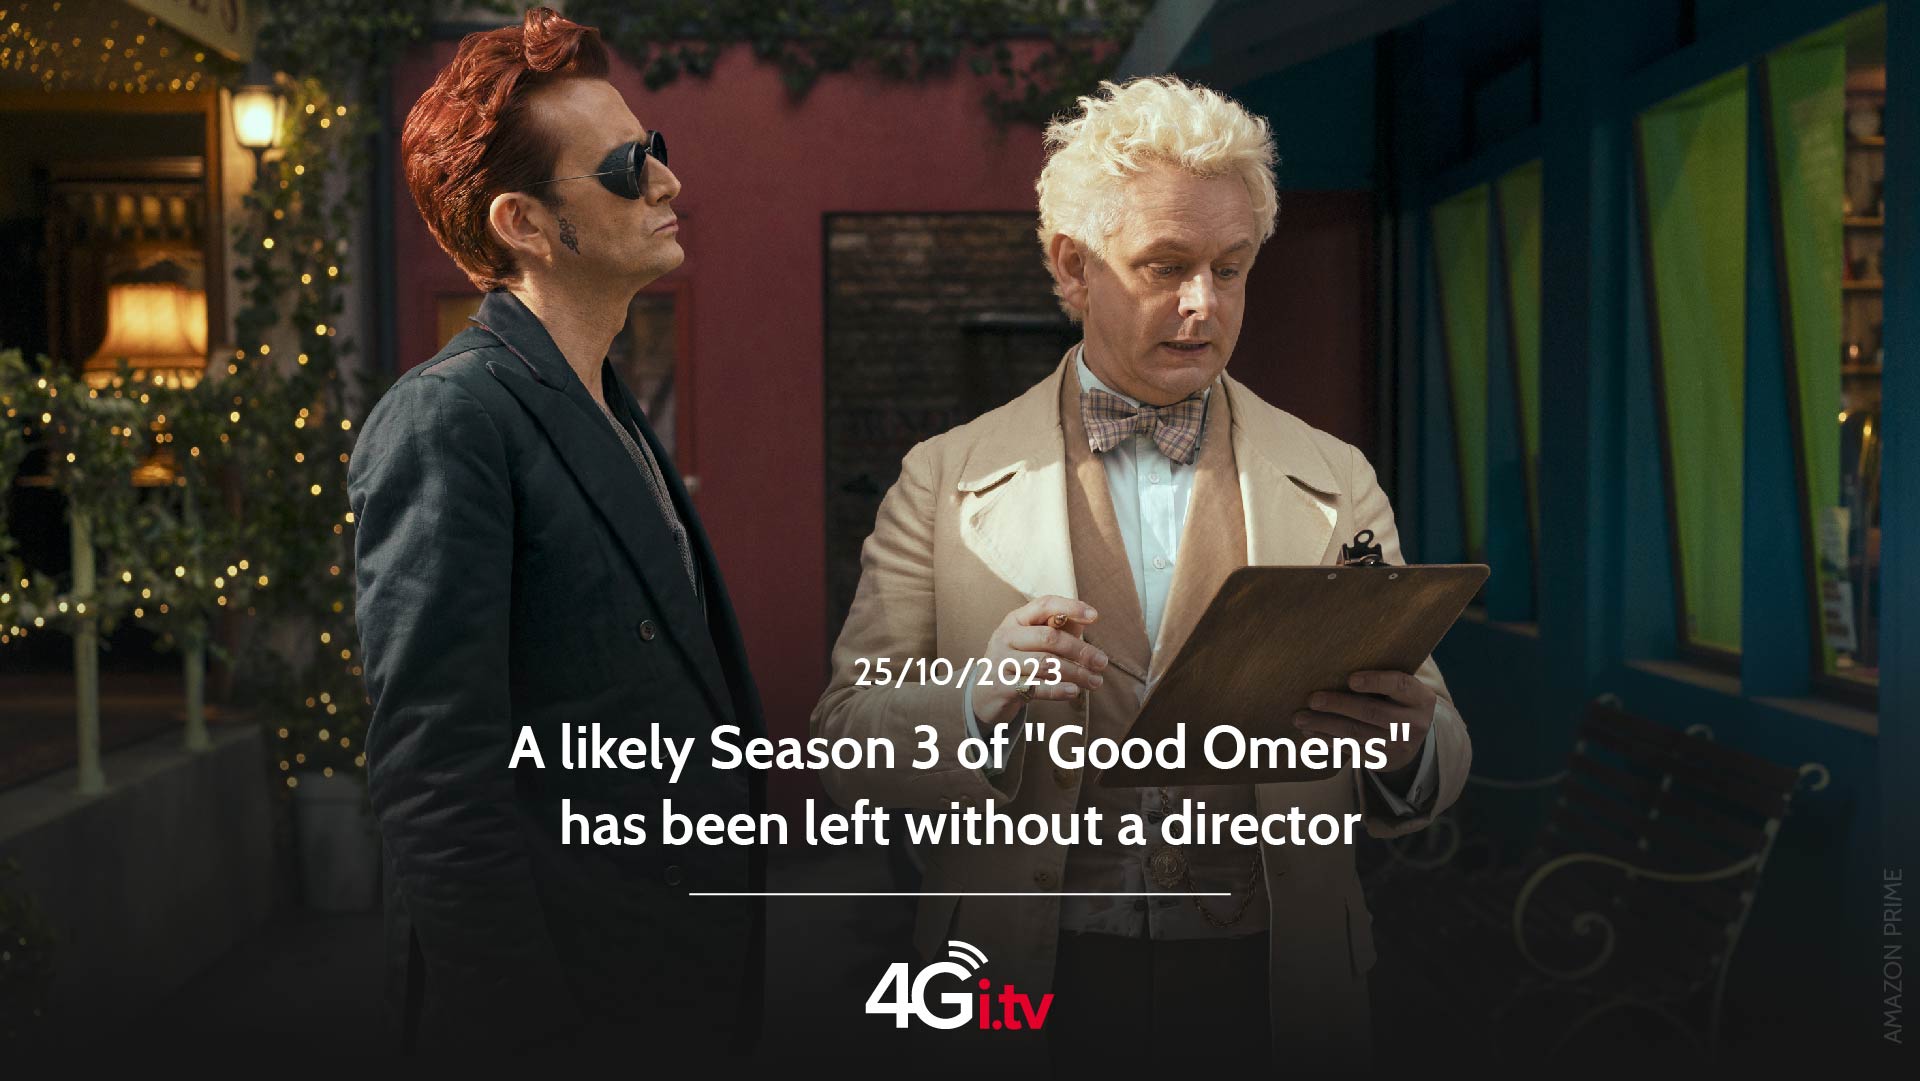 Lesen Sie mehr über den Artikel A likely Season 3 of “Good Omens” has been left without a director